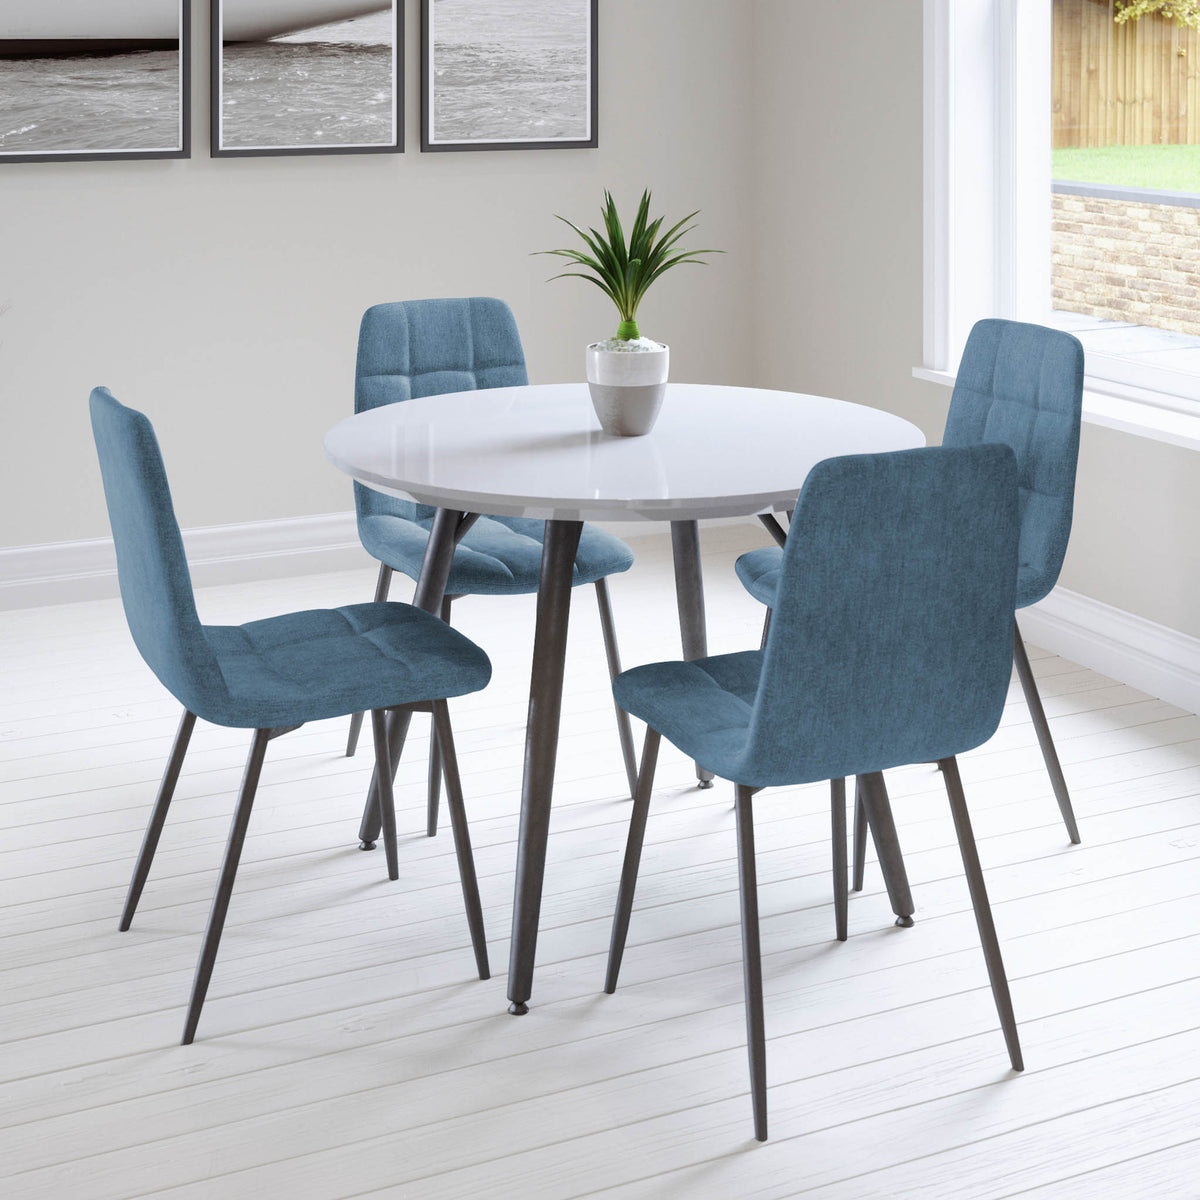 Paros Round Dining Table with 4 Olivia Blue Chairs